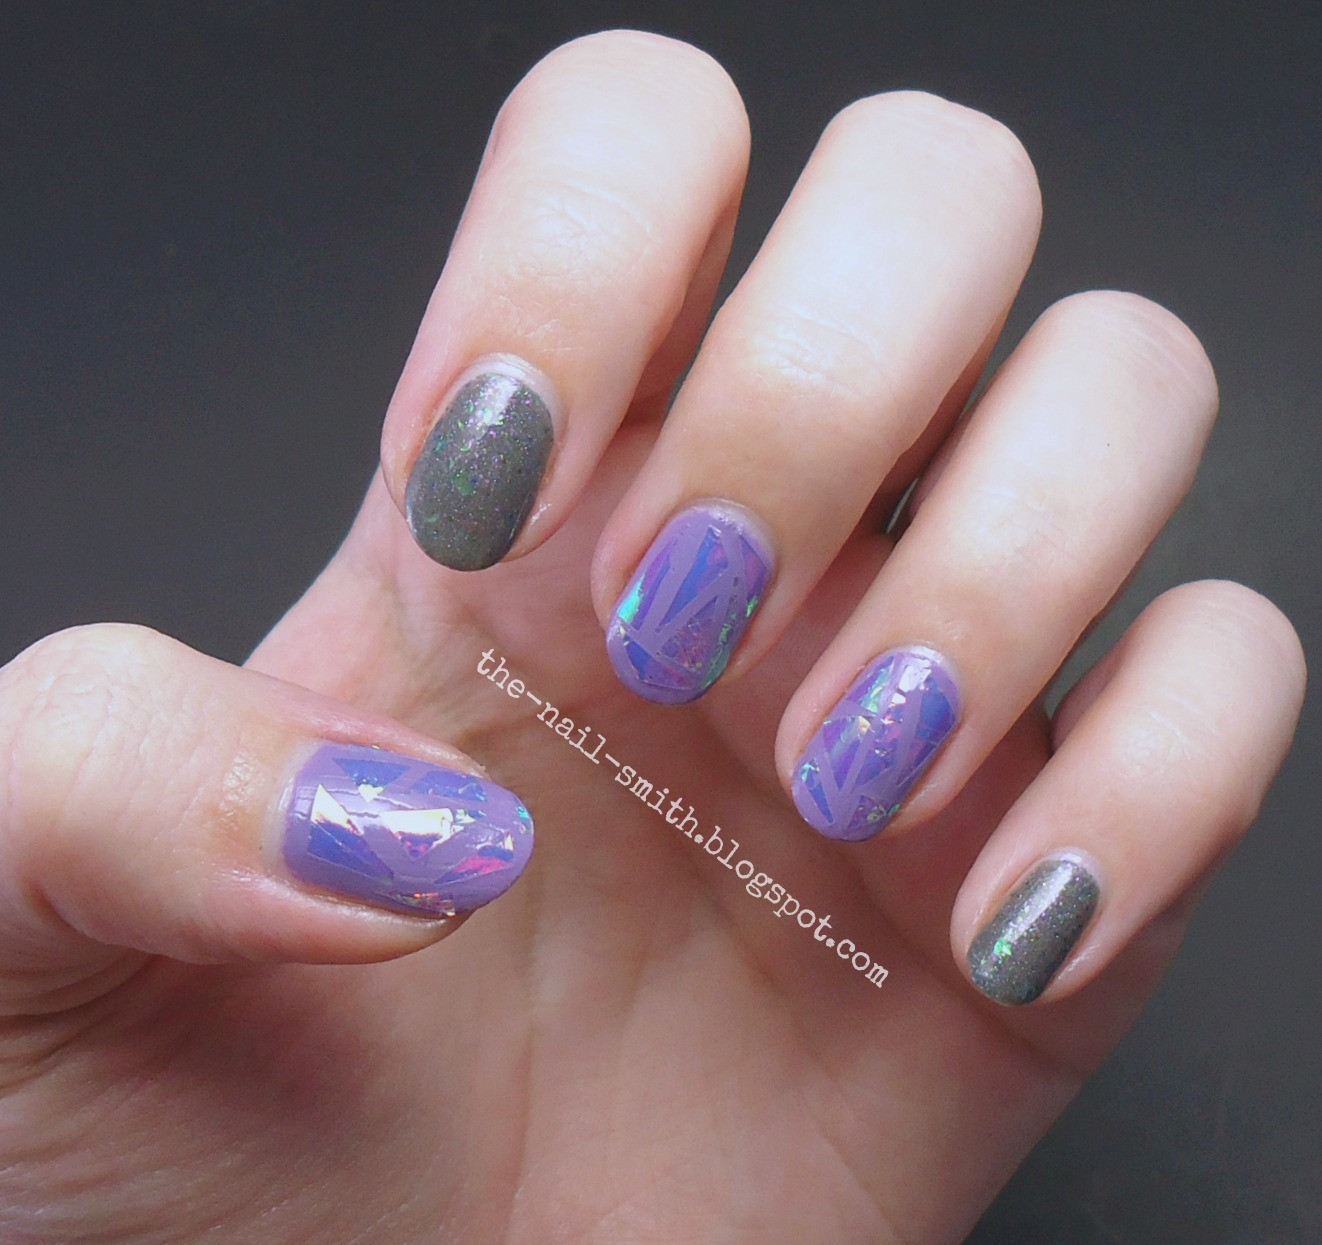 Glass Nail Art
 The Nail Smith Shattered Glass Nail Art Trend